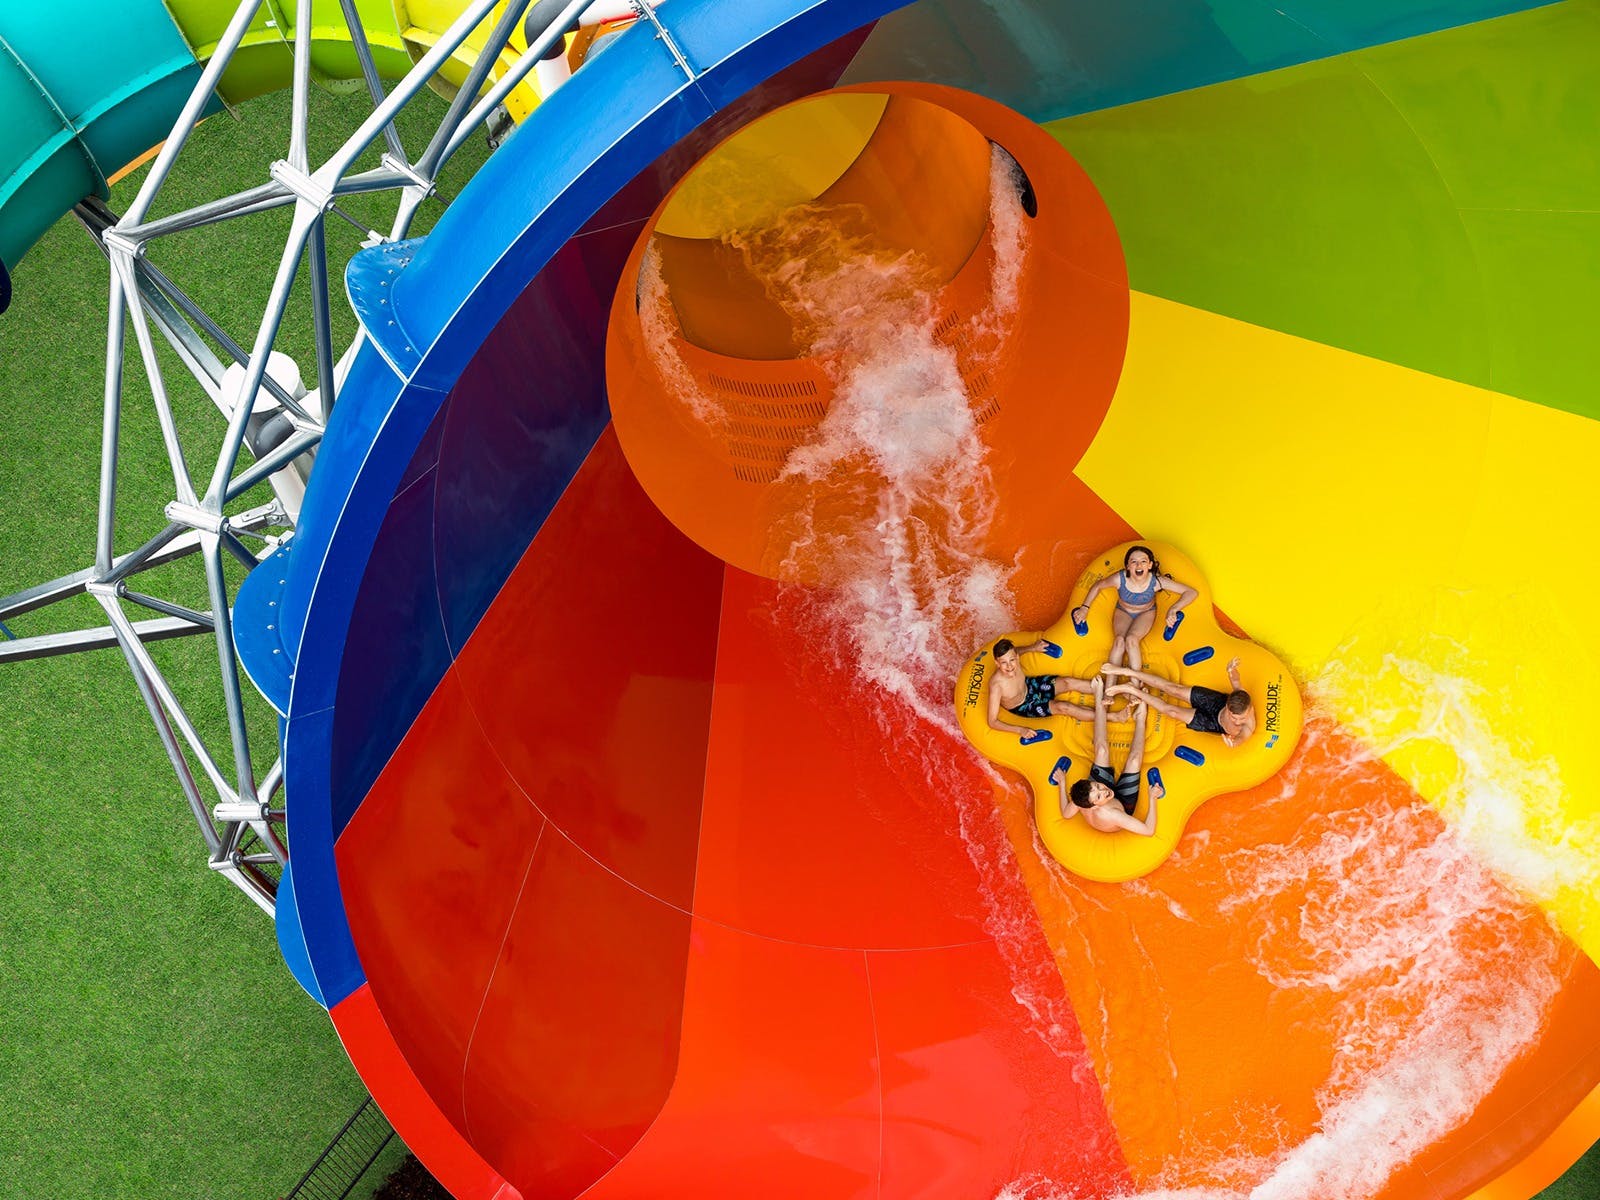 A group of people on an inflatable ring slide down a waterslide.